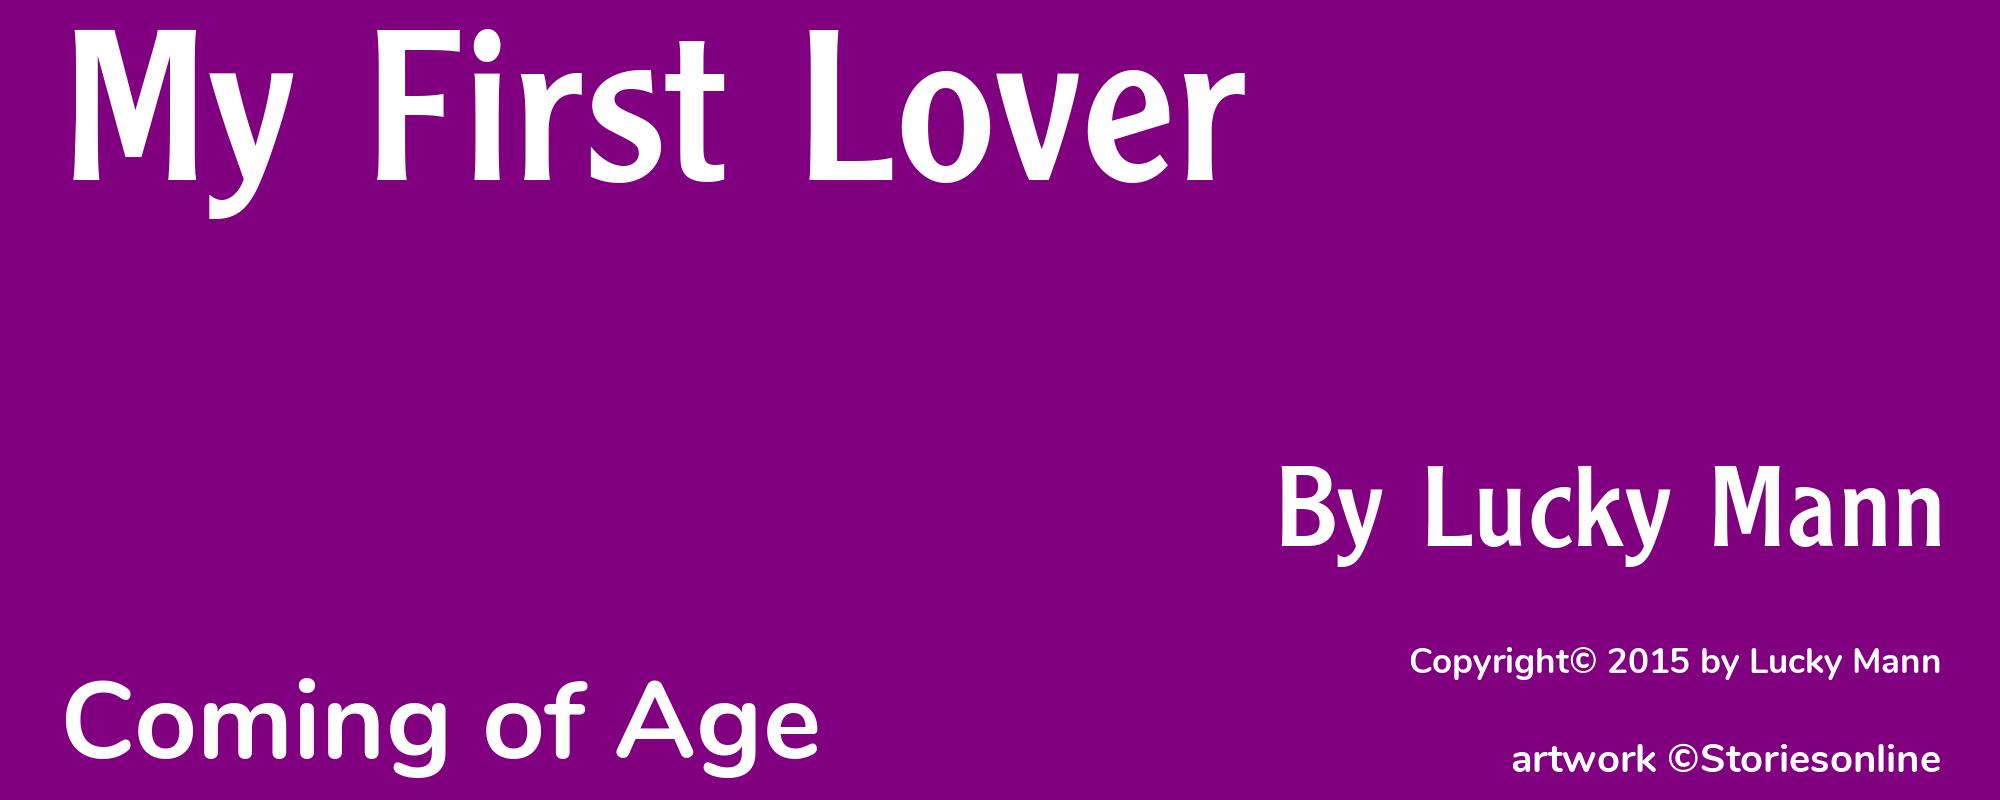 My First Lover - Cover